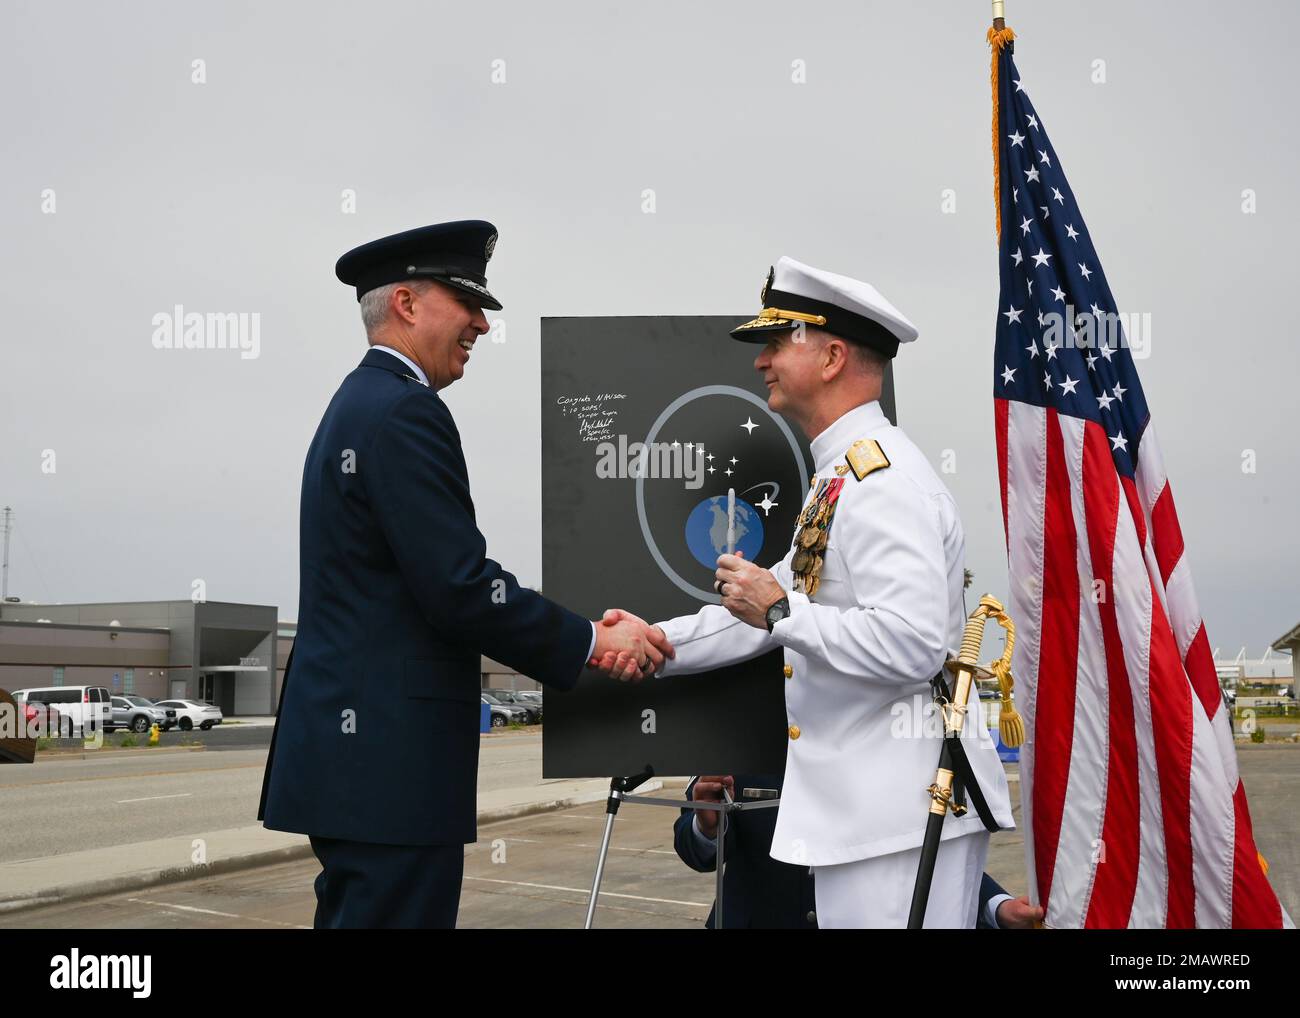 Lt. Gen. Stephen N. Whiting, Space Operations Command commander, shakes hands with Vice Adm. Ross Myers, U.S. Fleet Cyber Command/U.S. Tenth Fleet commander, at the activation ceremony for the 10th Space Operations Squadron at Point Mugu, California, June 6, 2022. 10 SOPS will fall under Space Operations Command’s satellite communication delta, DEL8, and perform the mission formerly fulfilled by the Naval Satellite Operations Center, which was disestablished the same day. Stock Photo